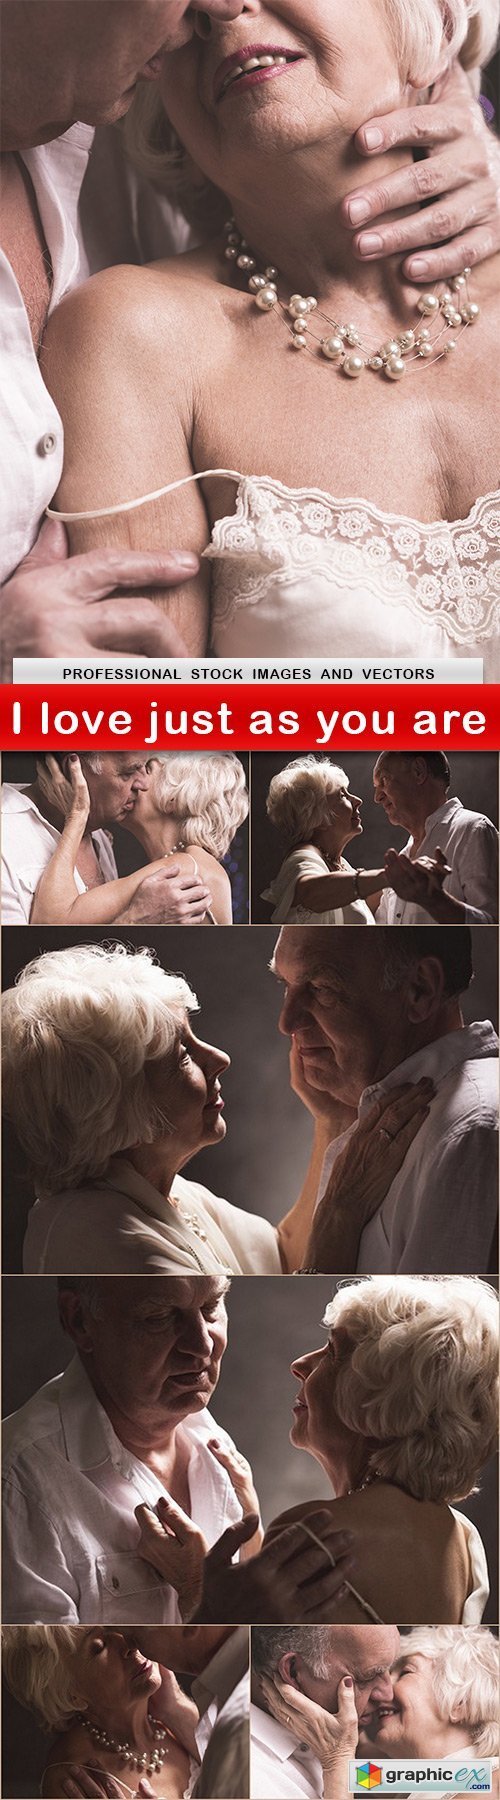 I love just as you are - 7 UHQ JPEG